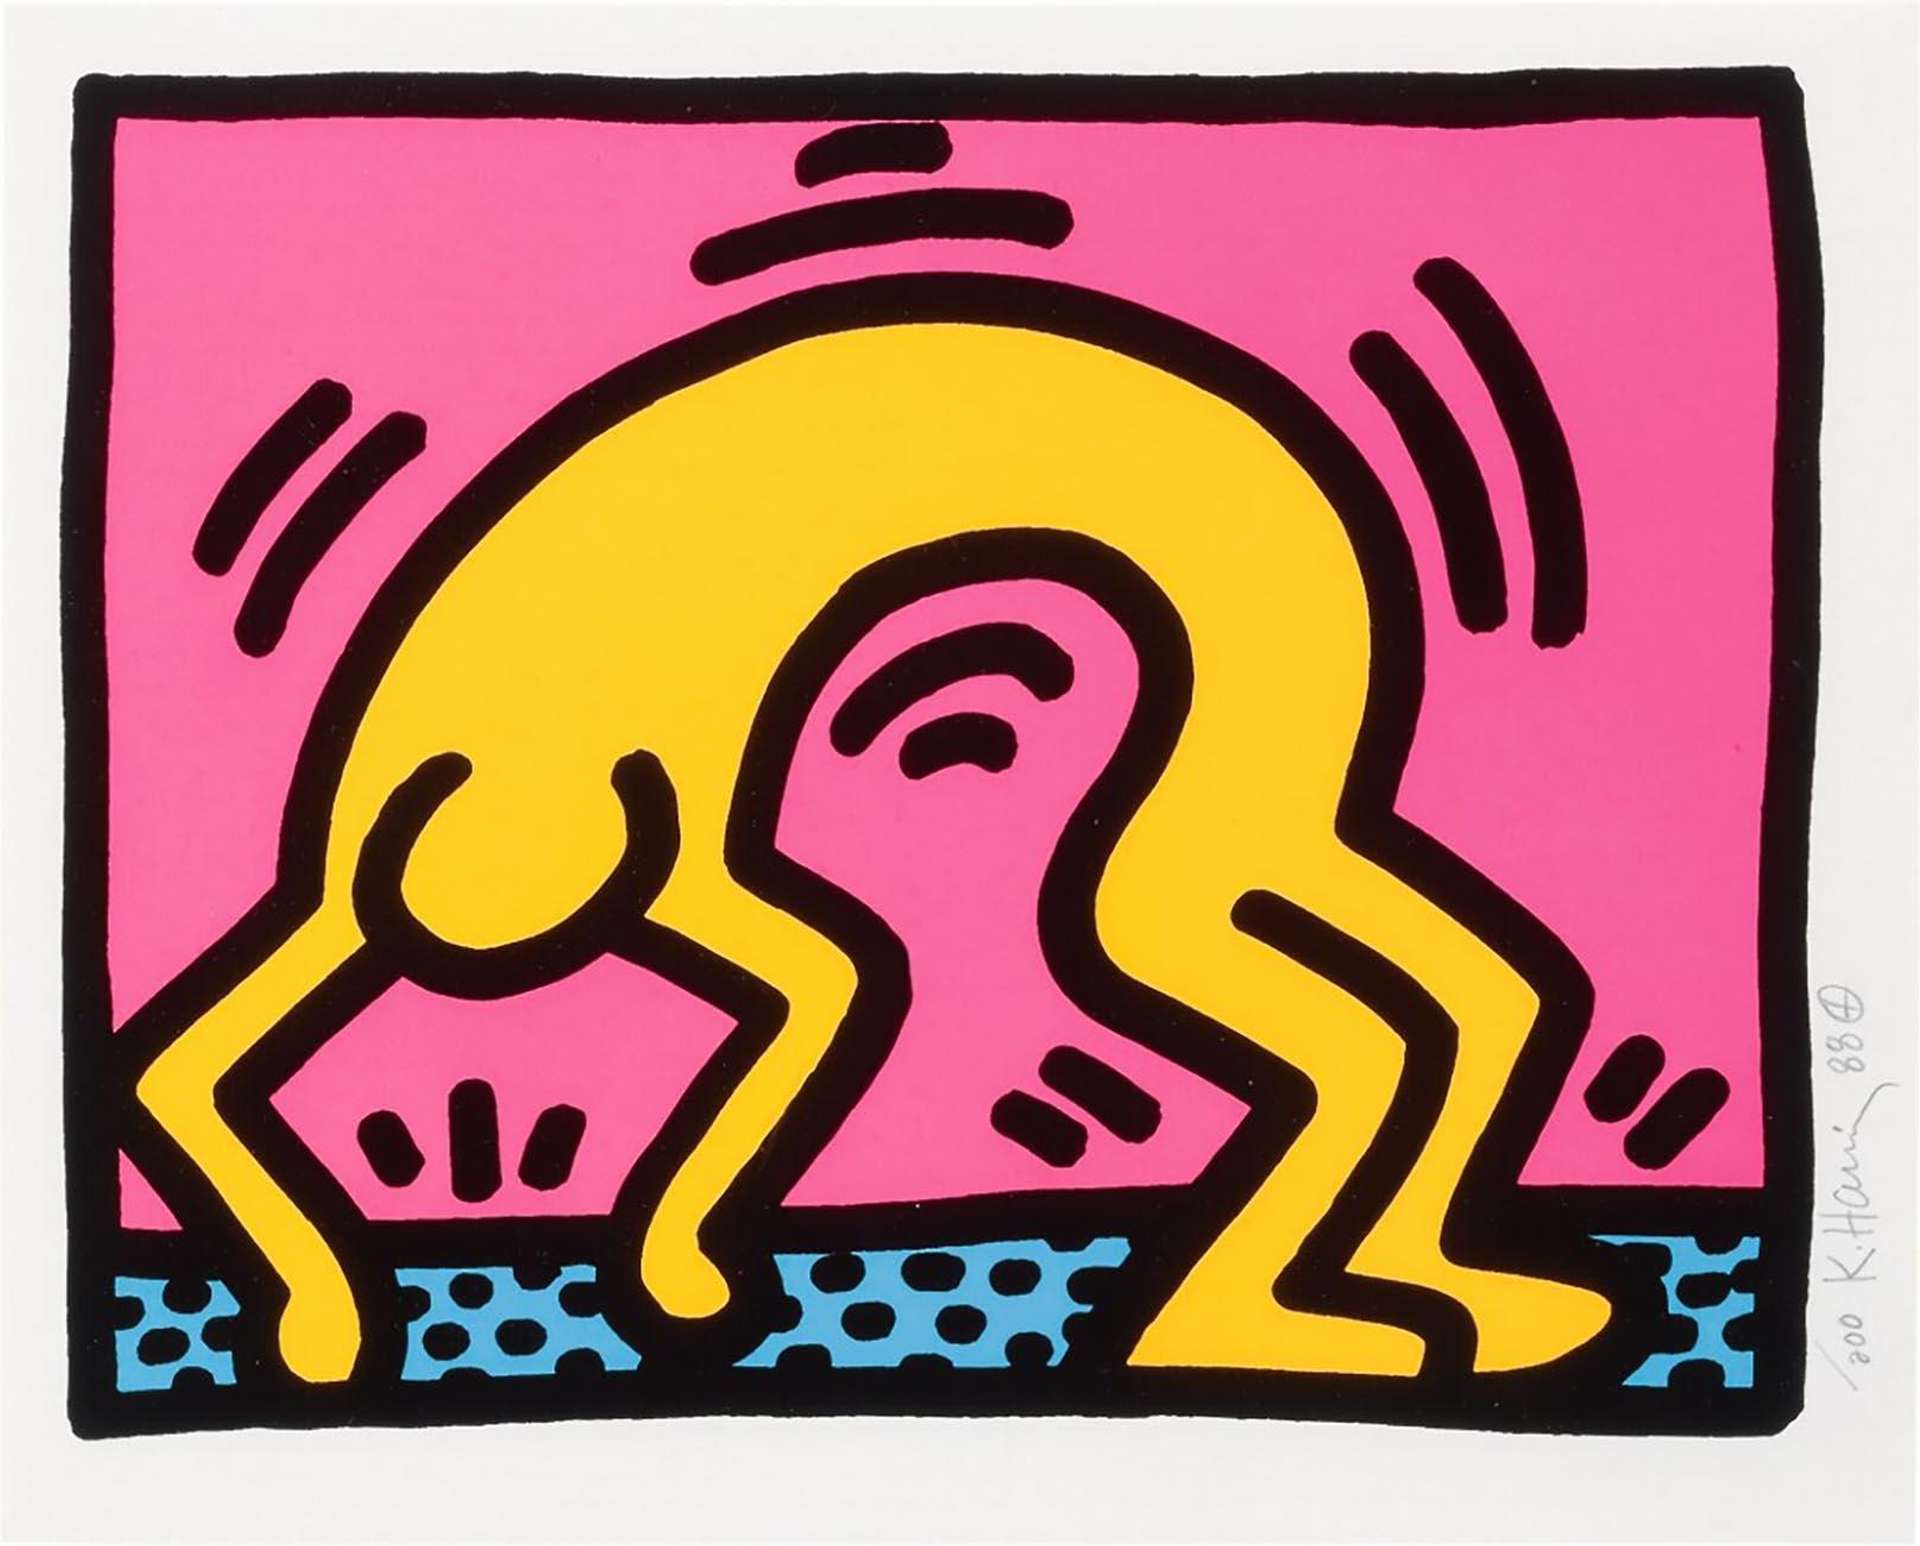 How to Authenticate Keith Haring Prints